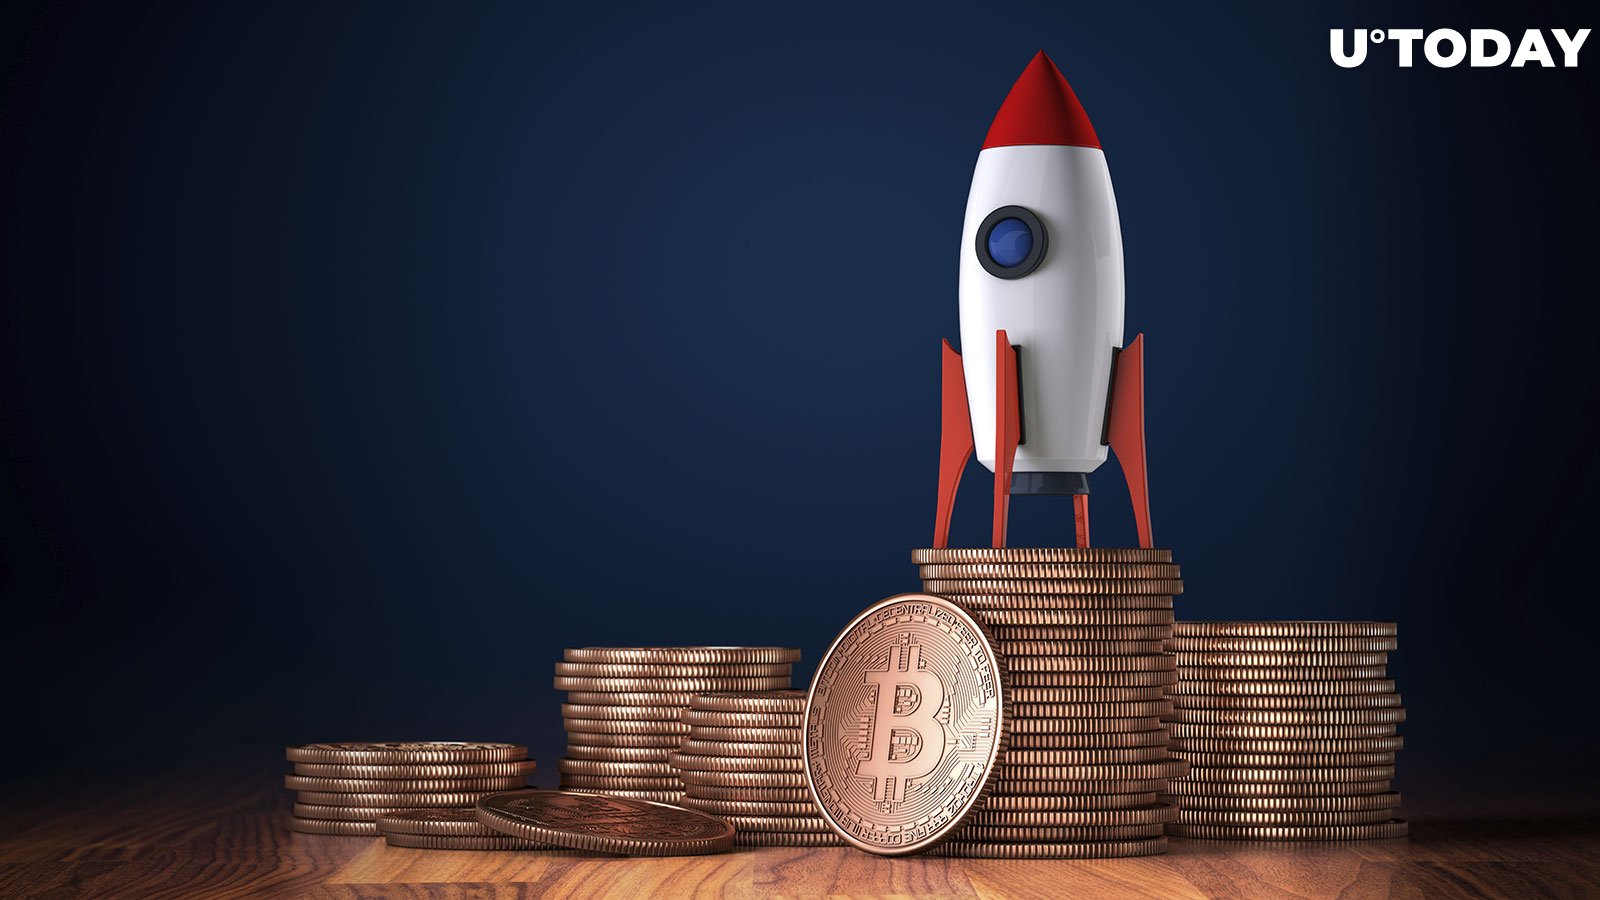 Bitcoin Ready to Soar, According to Glassnode Co-Founder